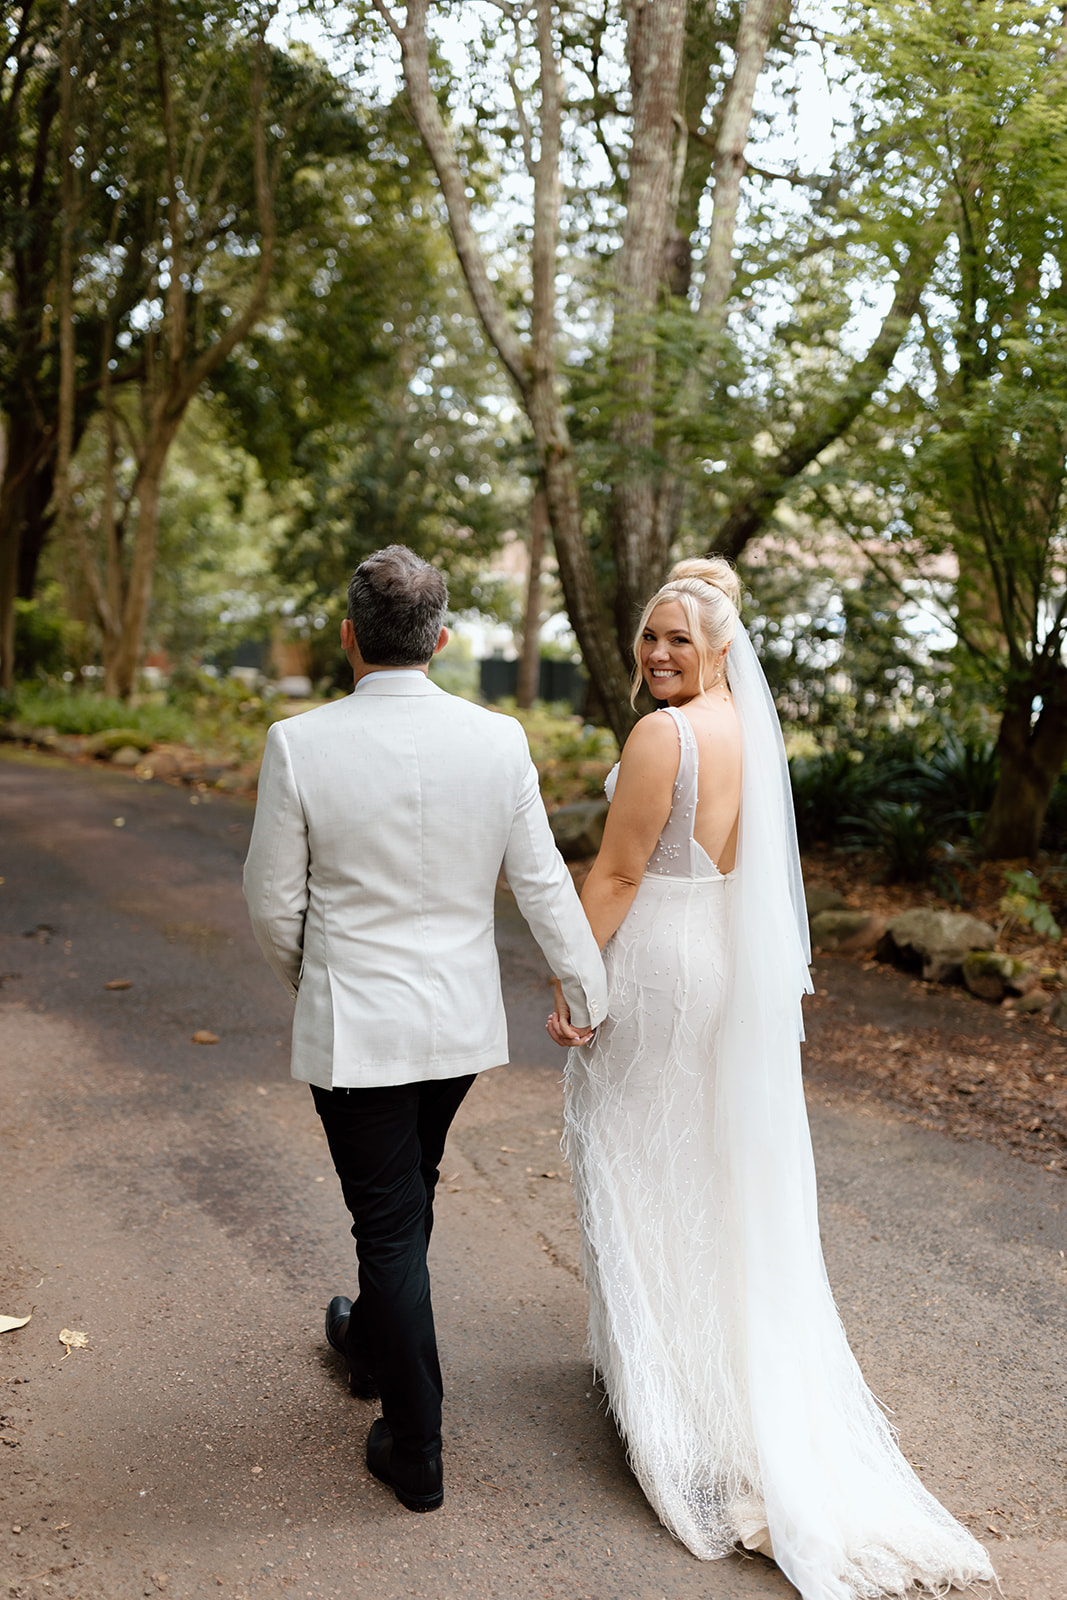 Bridal portraits at the wedding in the South Coast The Lodge Jamberoo